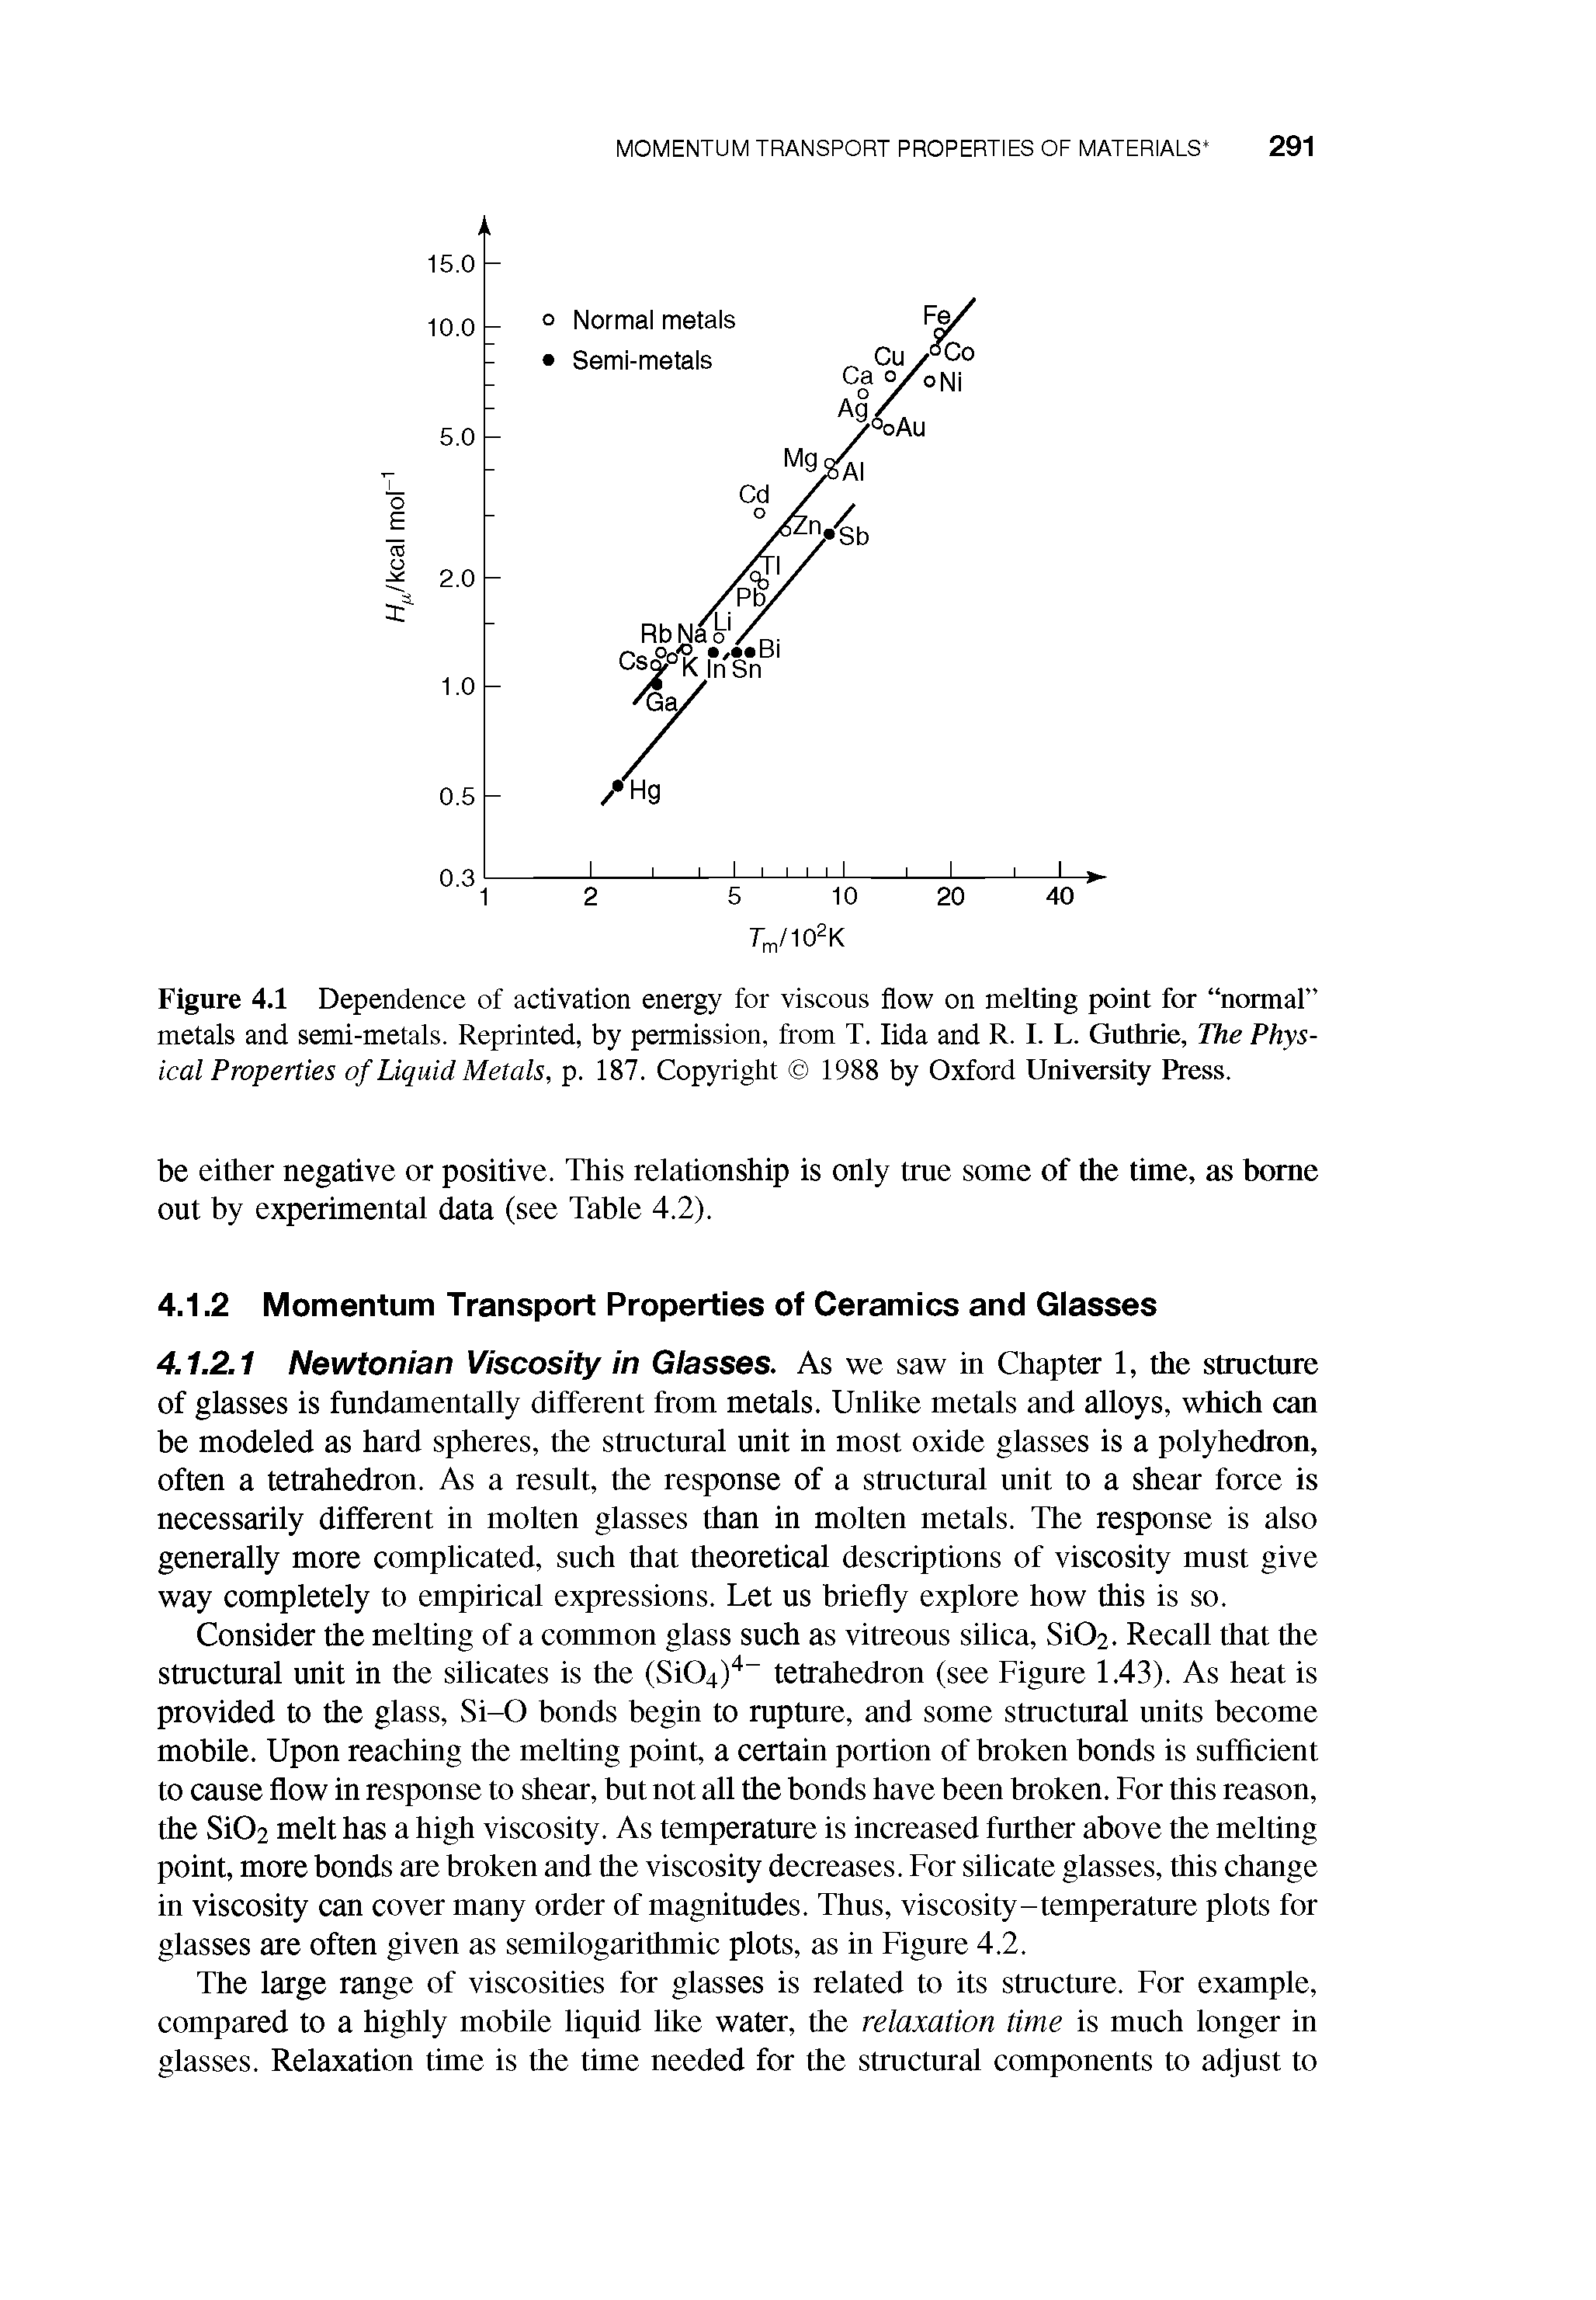 Figure 4.1 Dependence of activation energy for viscous flow on melting point for normal metals and semi-metals. Reprinted, by permission, from T. lida and R. I. L. Guthrie, The Physical Properties of Liquid Metals, p. 187. Copyright 1988 by Oxford University Press.